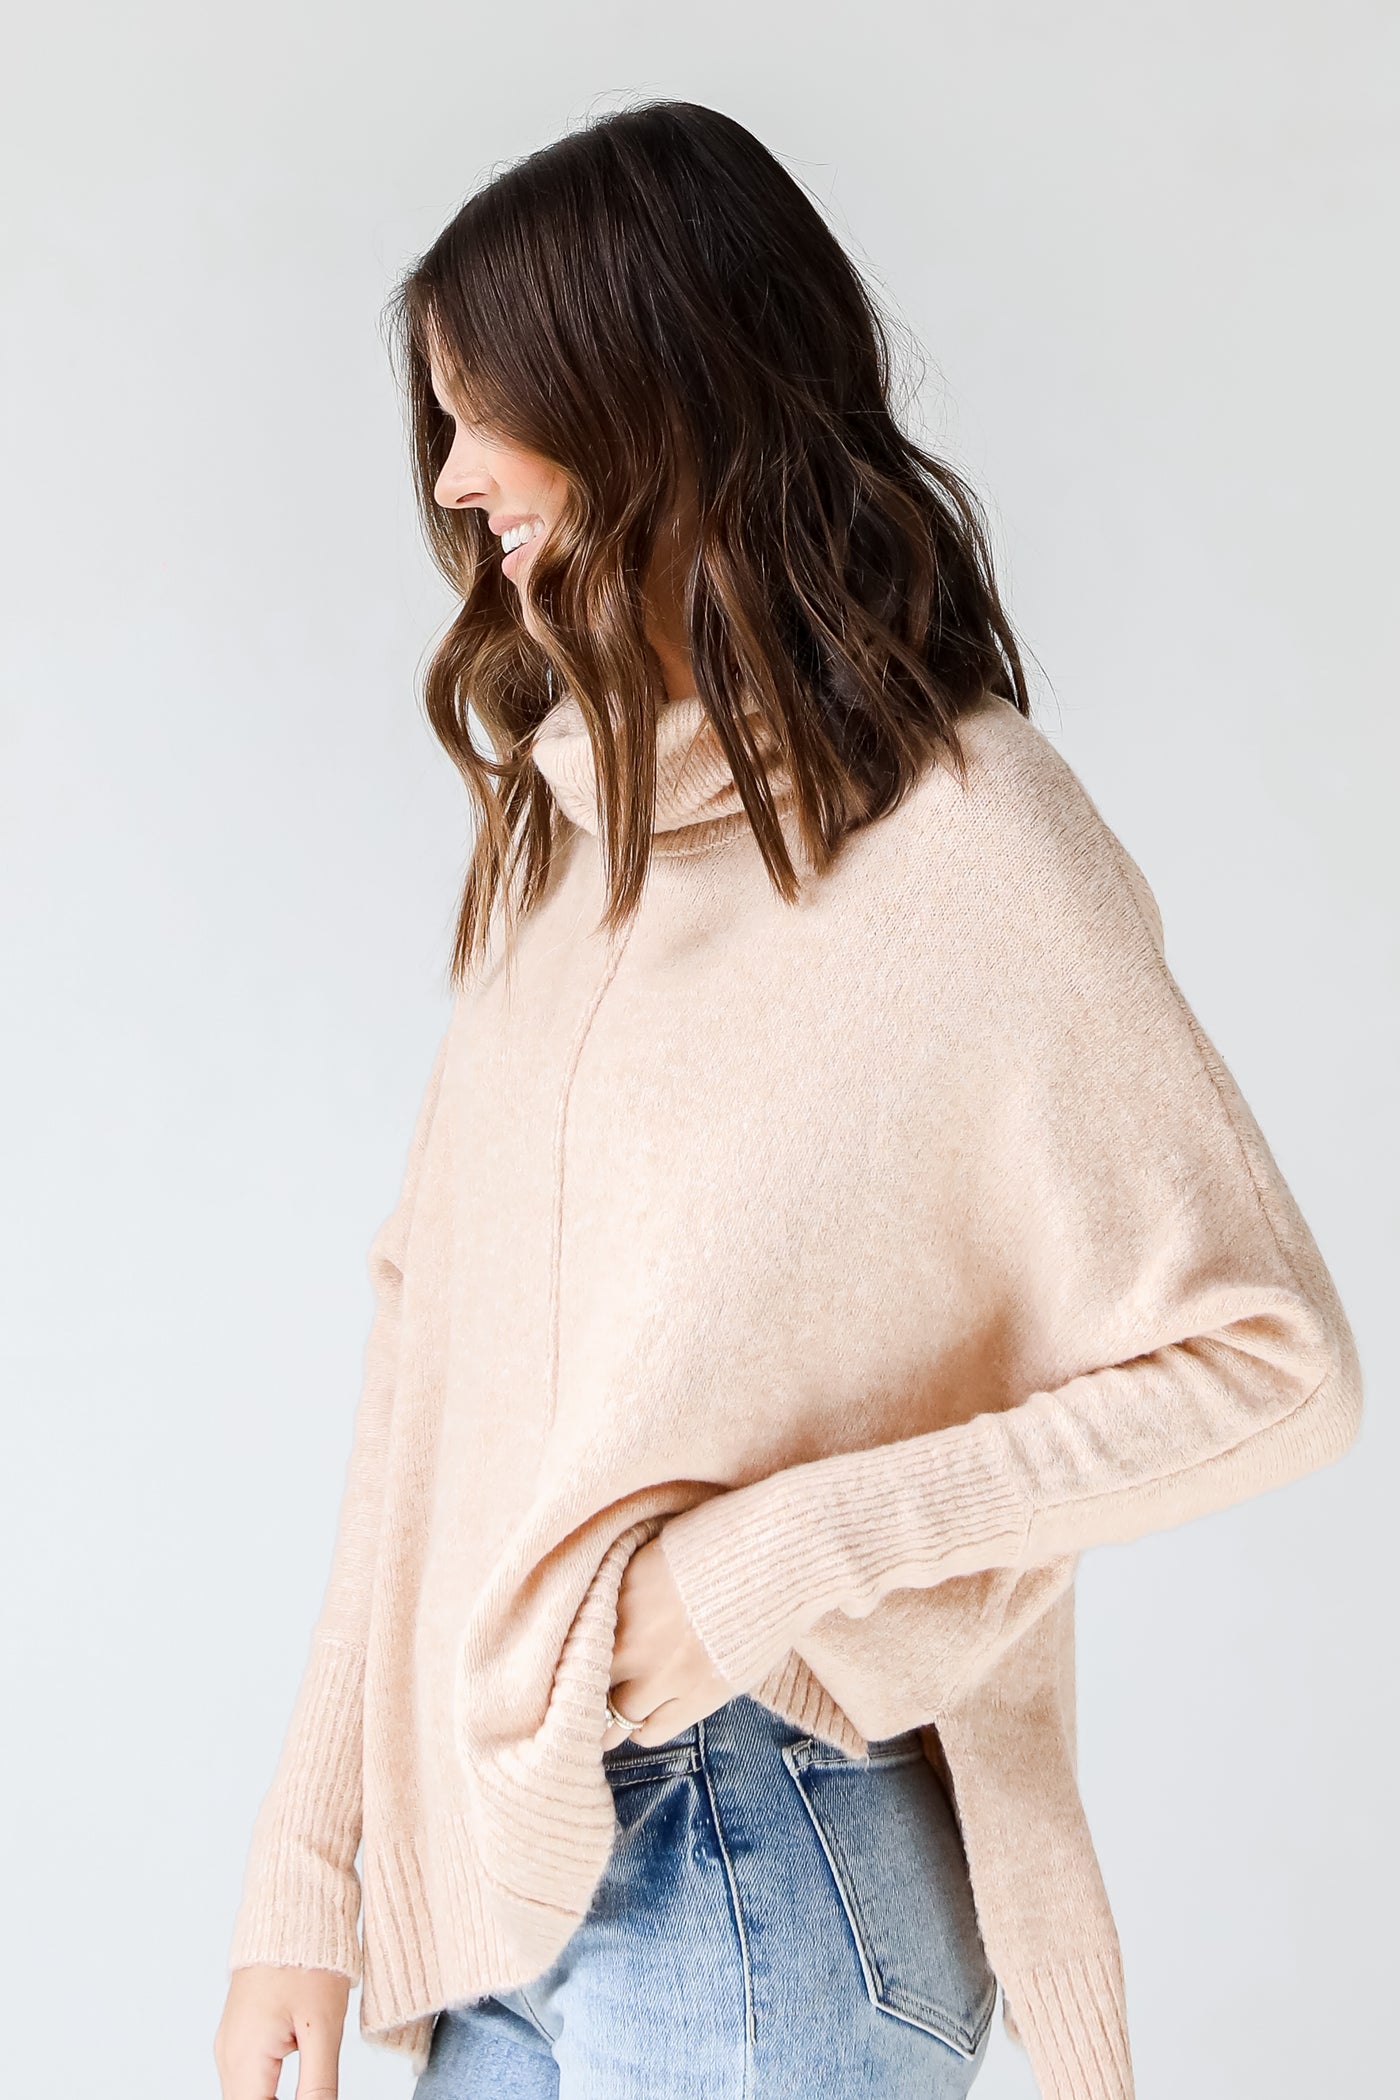 Sweater in ivory side view